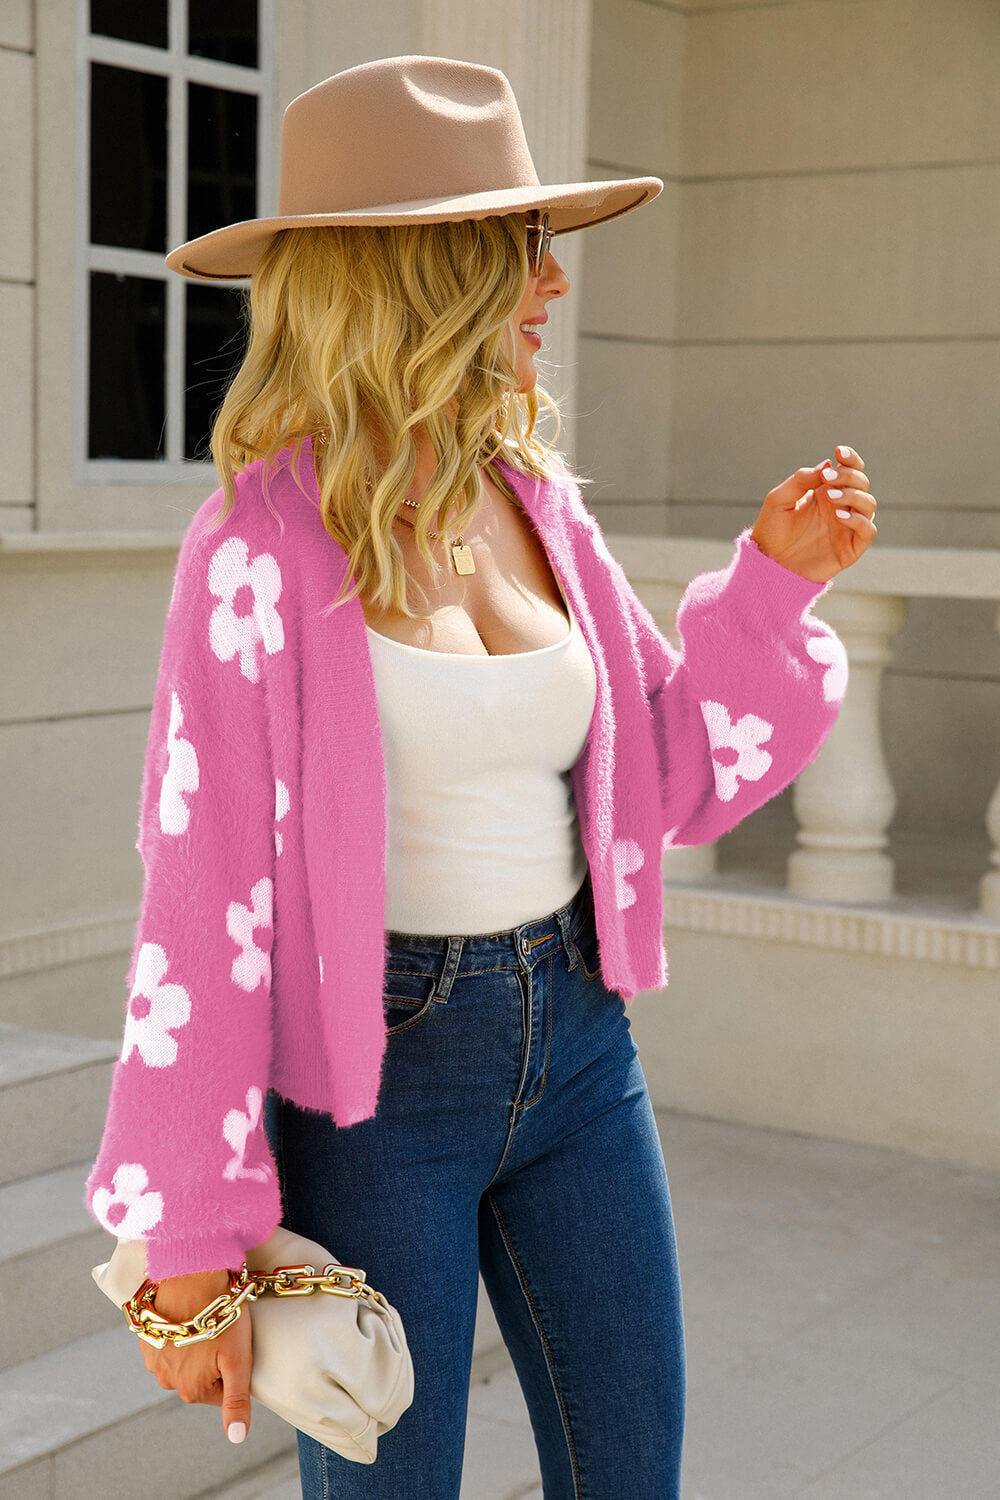 Floral Open Front Fuzzy Cardigan  | KIKI COUTURE-Women's Clothing, Designer Fashions, Shoes, Bags